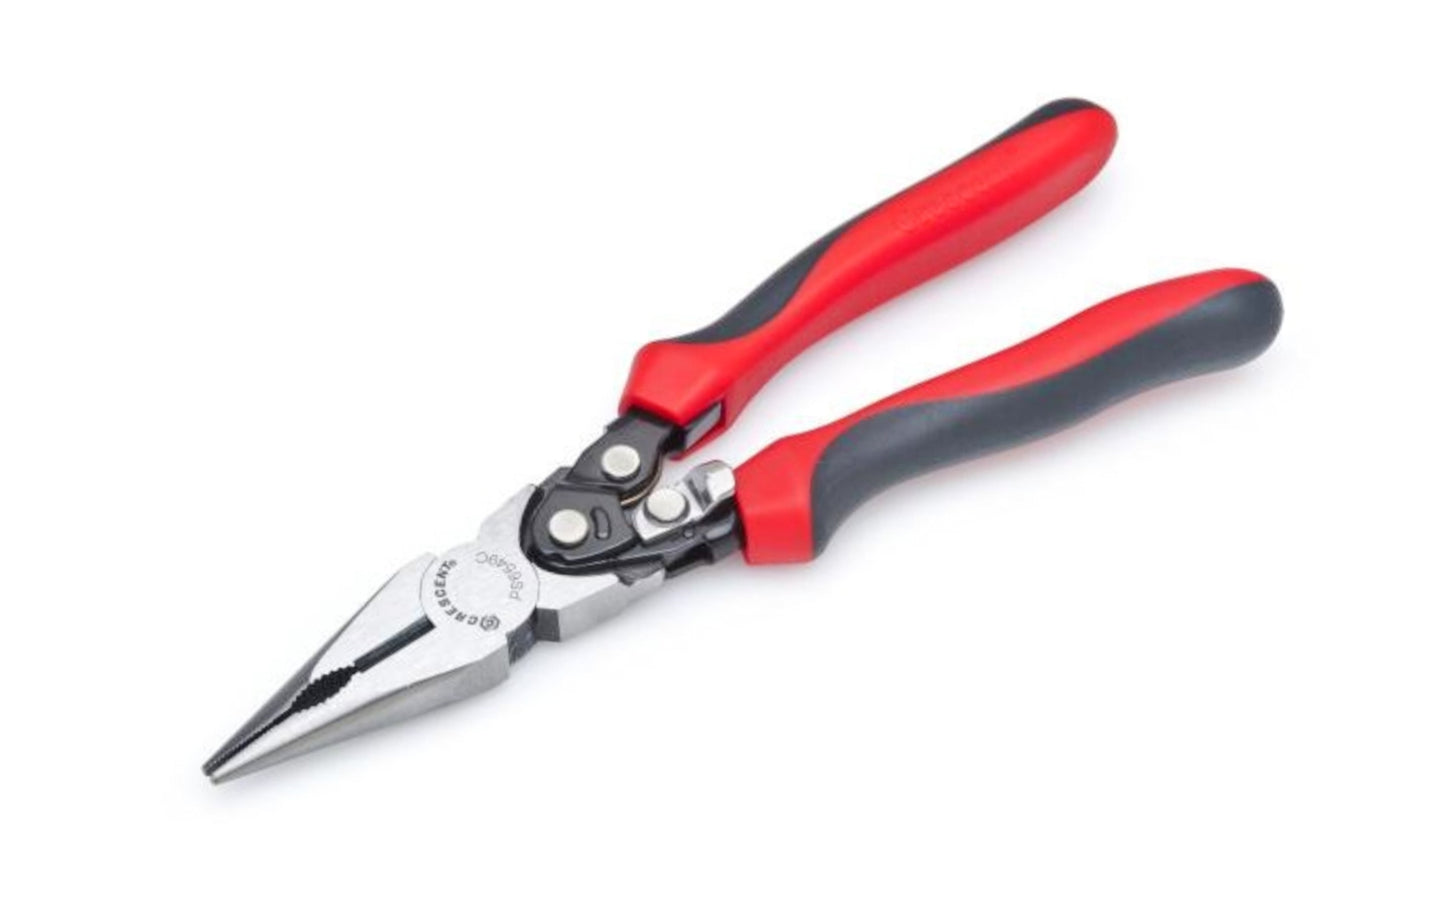 Crescent 9" Compound Action Long Nose Pliers. Increase your gripping power by 50% with the compound-leverage design of these Crescent Pro-Series 9" Pliers. The chrome vanadium steel construction of these pliers gives them increased durability, and the co-molded grips give the user added comfort and control. 